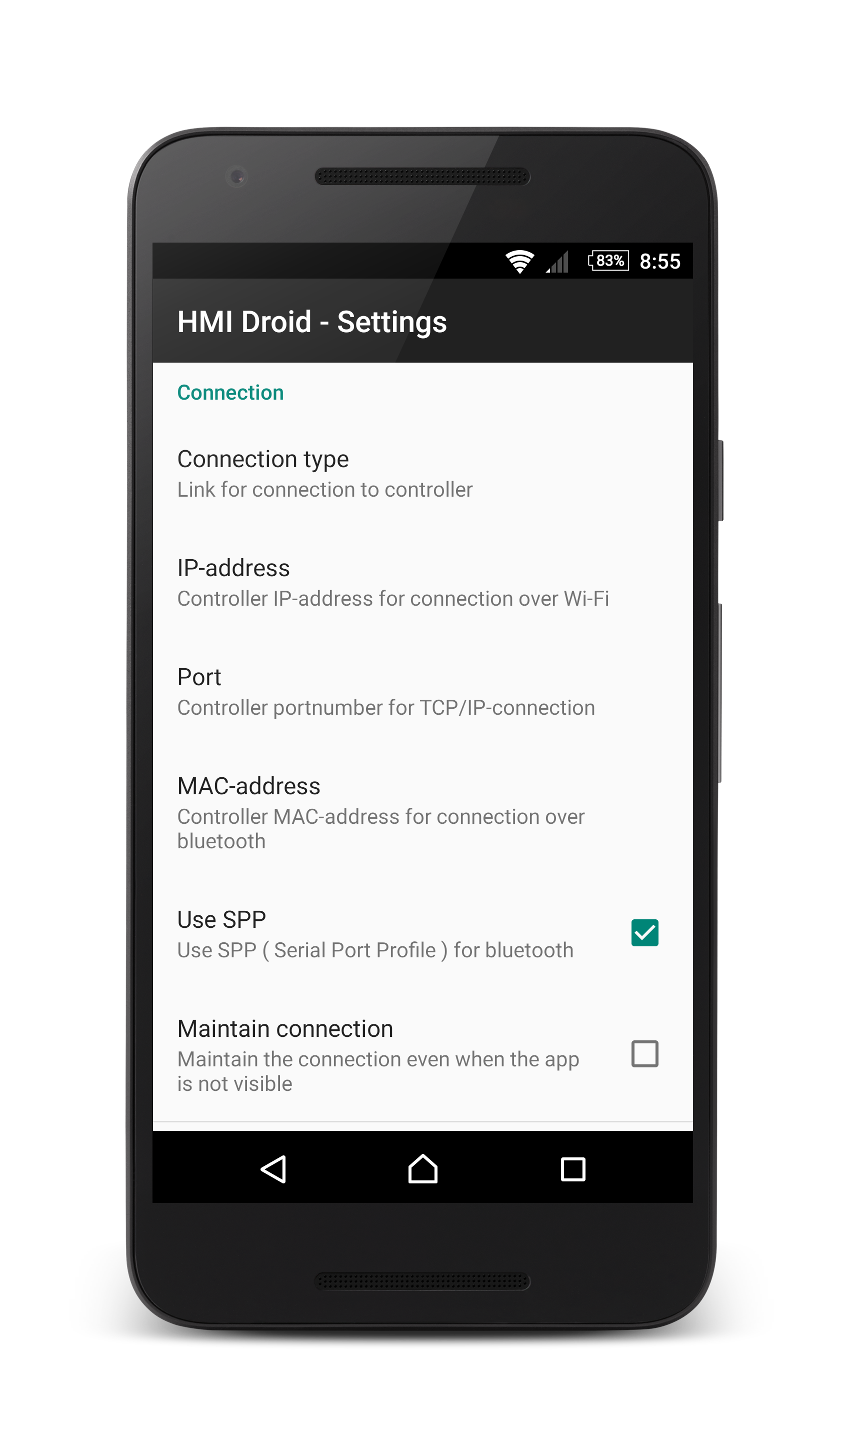 HMI Droid - Settings for connection